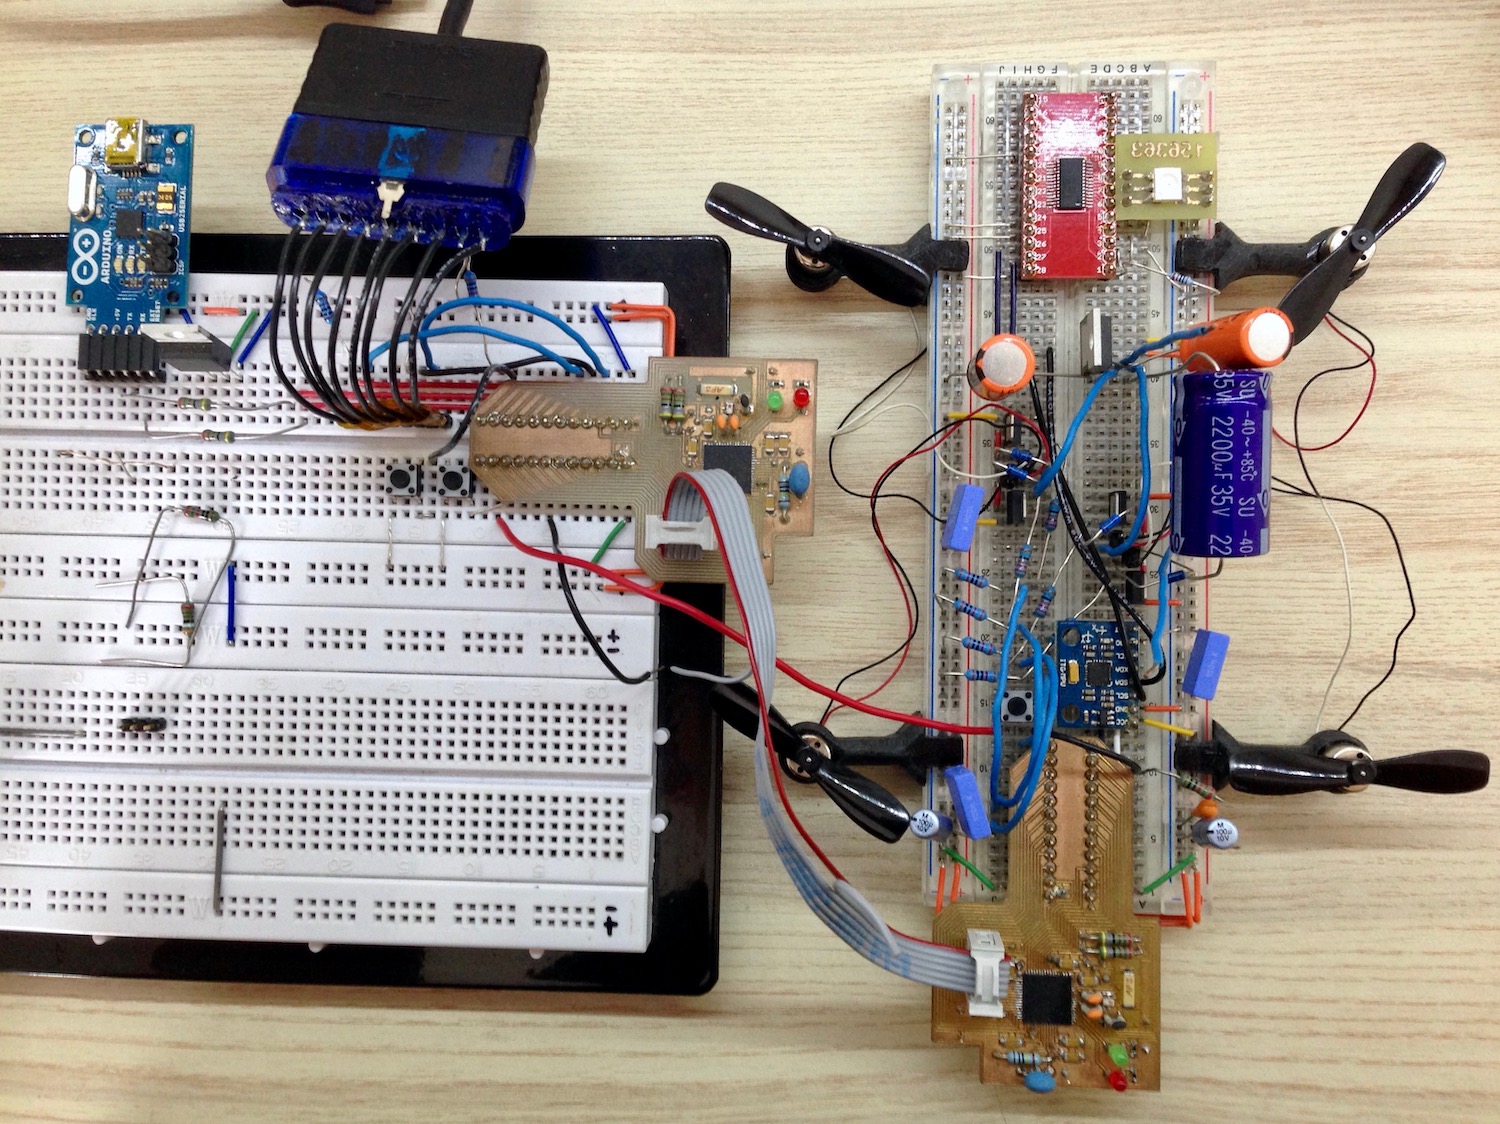 Development breadboard setup with custom prototyping PCBs and mounts for propellers.